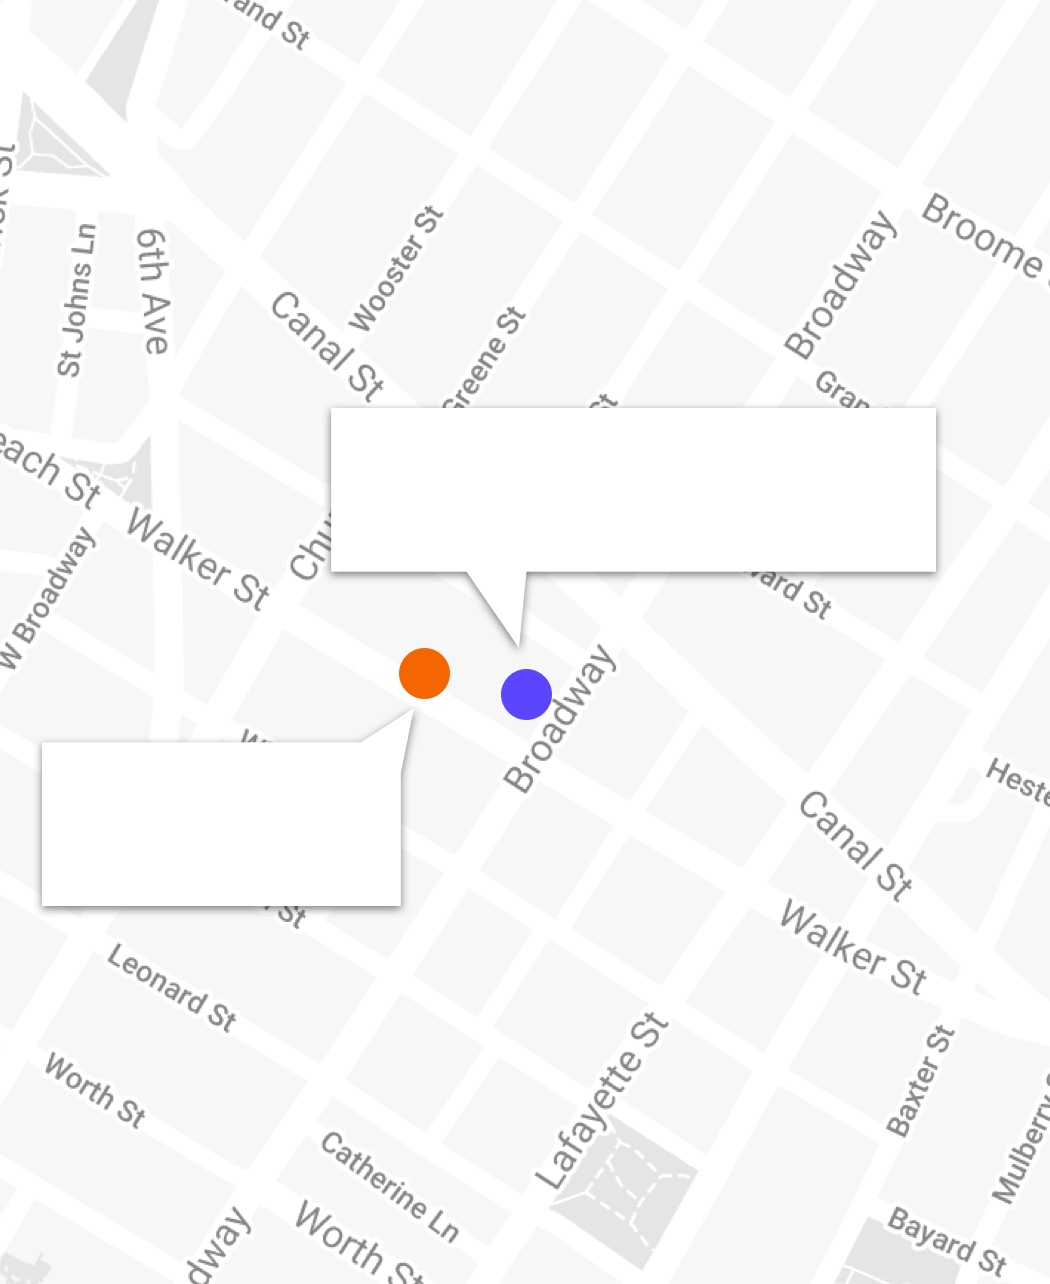 Map Of Tribeca with Soho Rep locations pinned